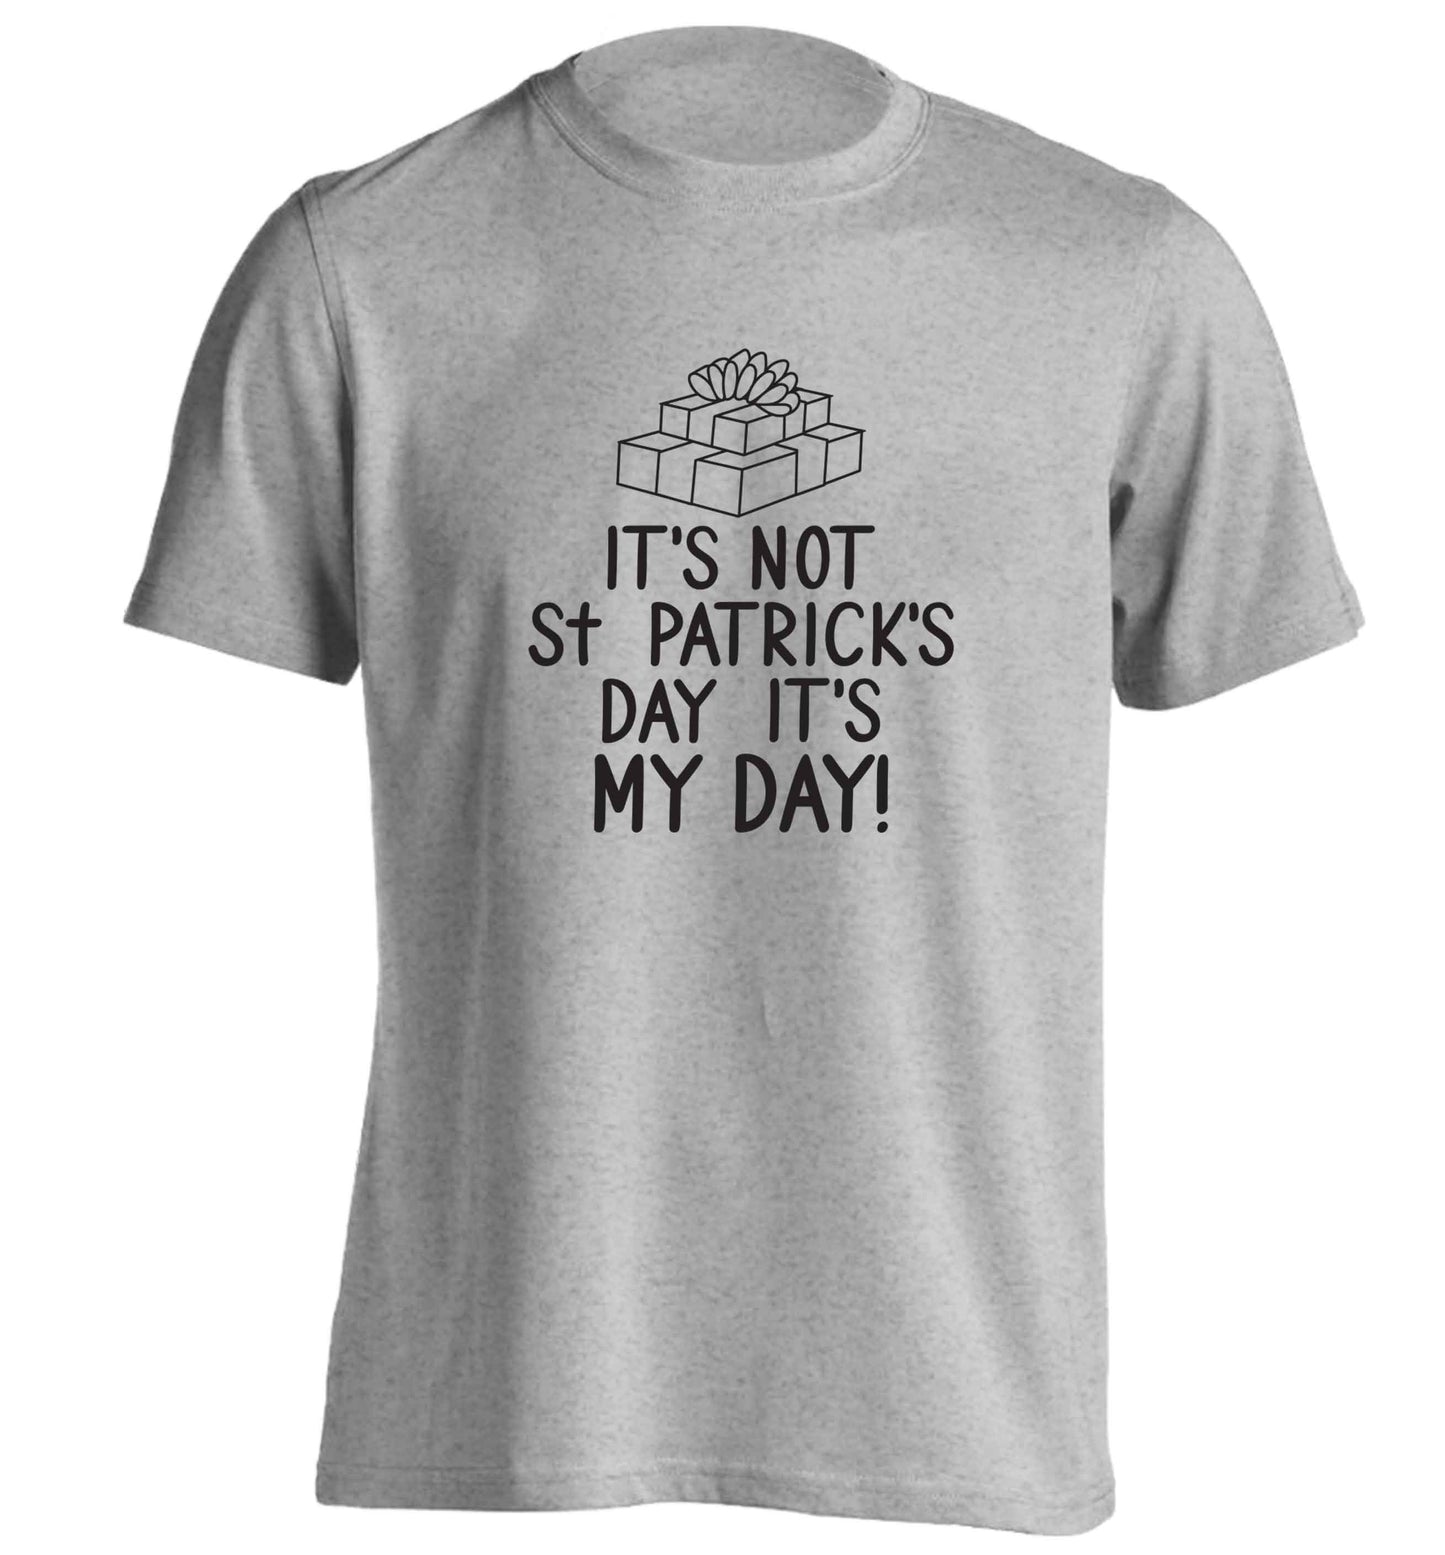 Funny gifts for your mum on mother's dayor her birthday! It's not St Patricks day it's my day adults unisex grey Tshirt 2XL